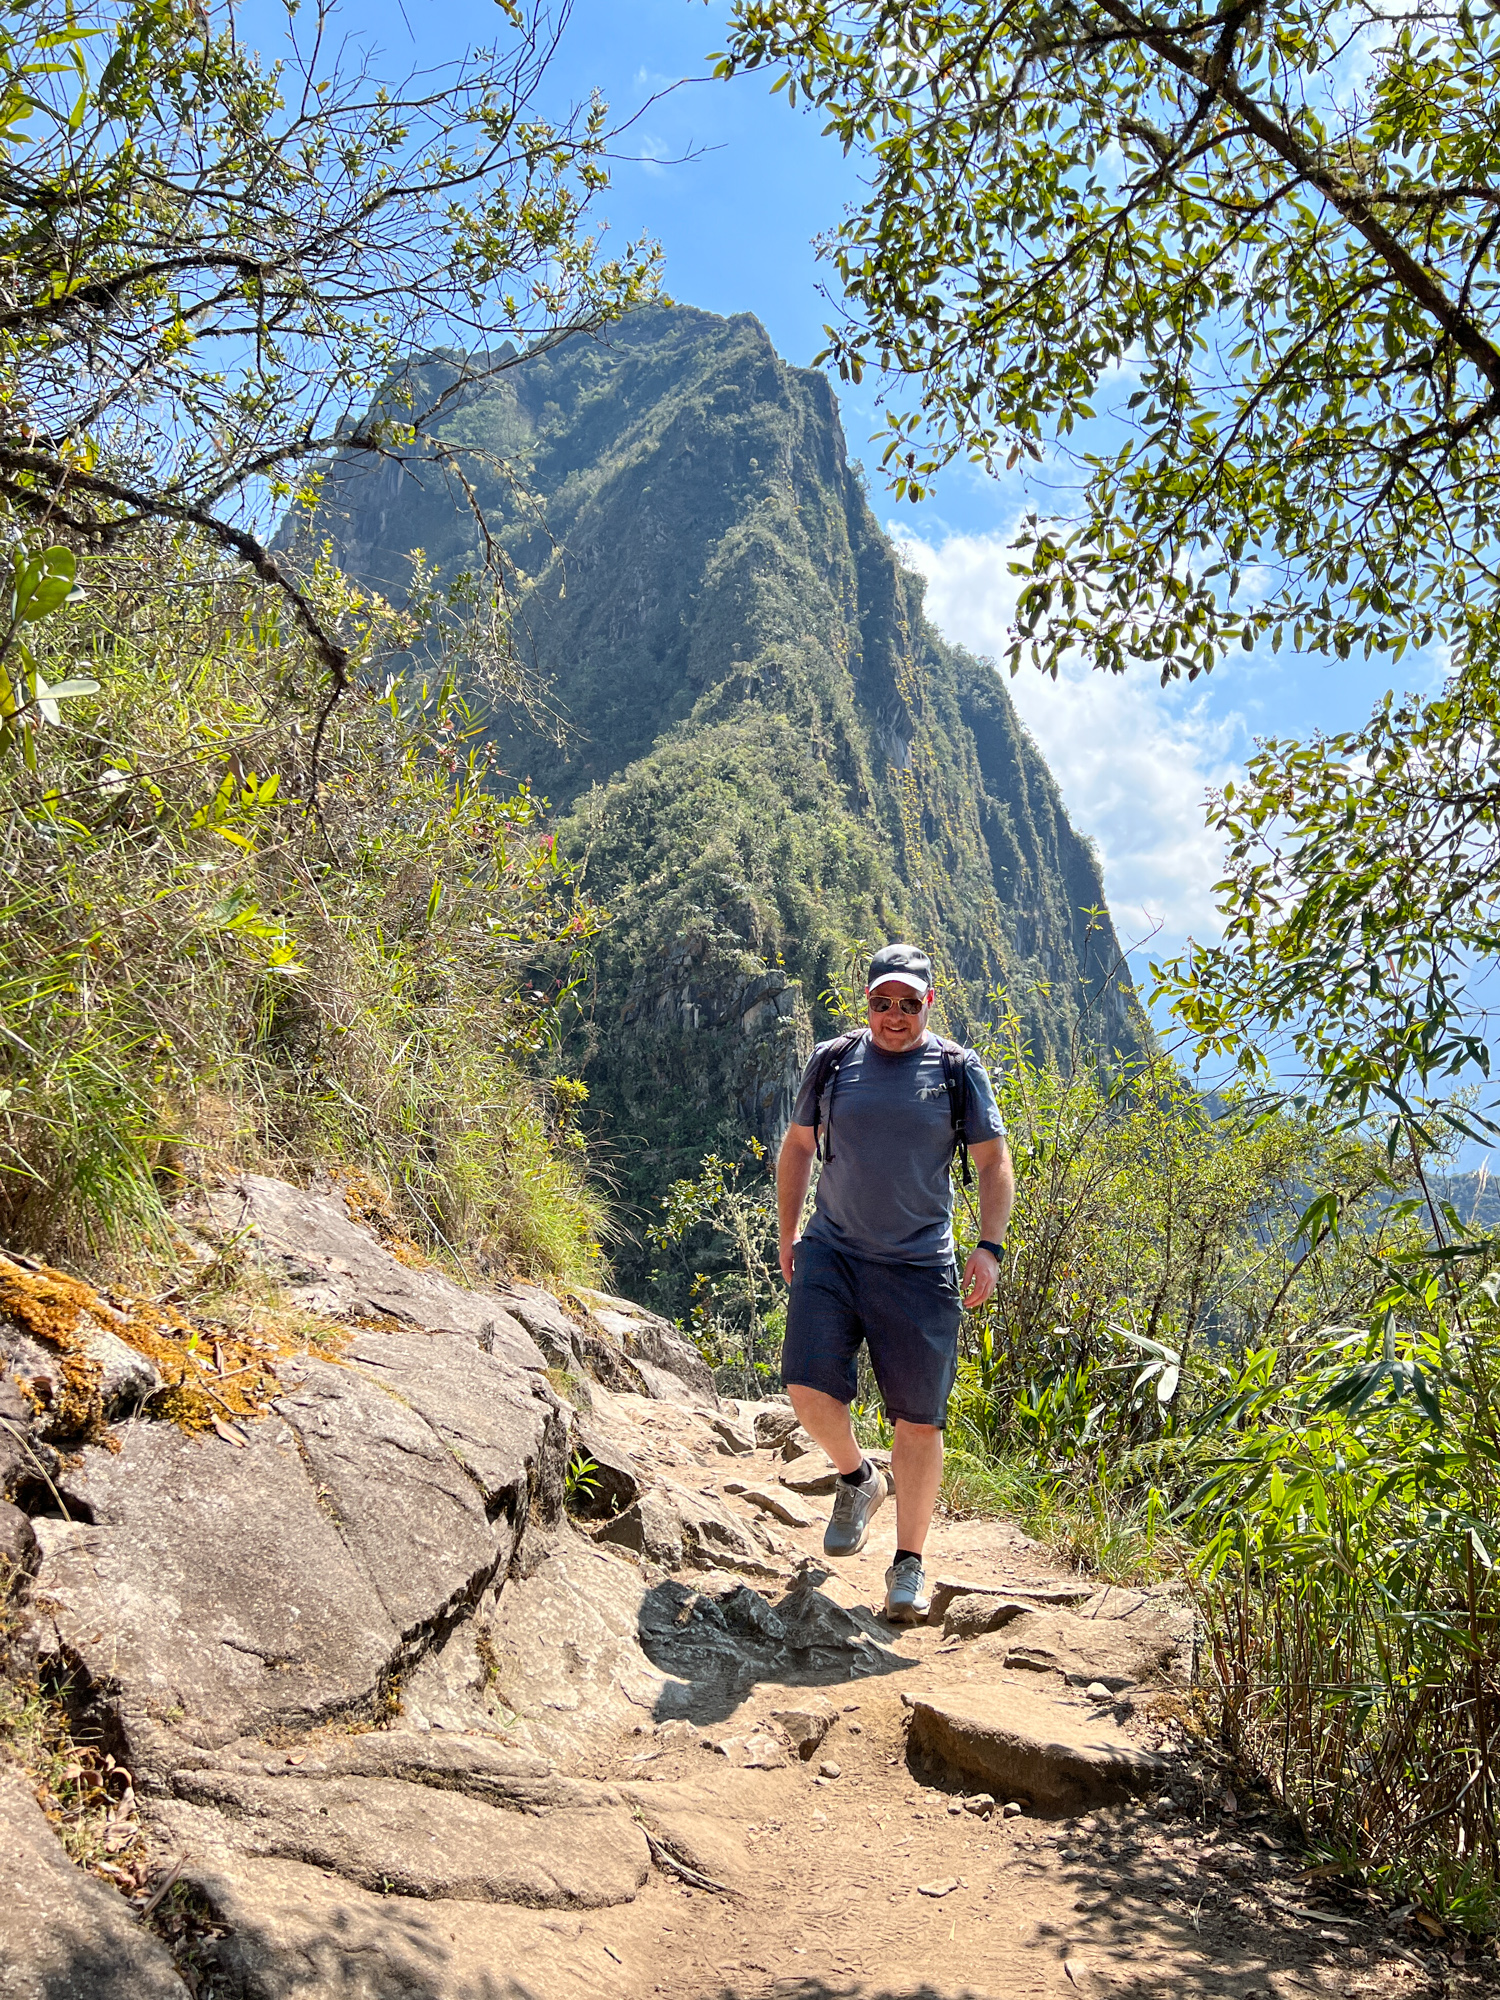 Dave hiking in Machu Picchu with Huayna Picchu in the background. His third visit was a top travel experience in 2022. (photo by Kelly Lemons)